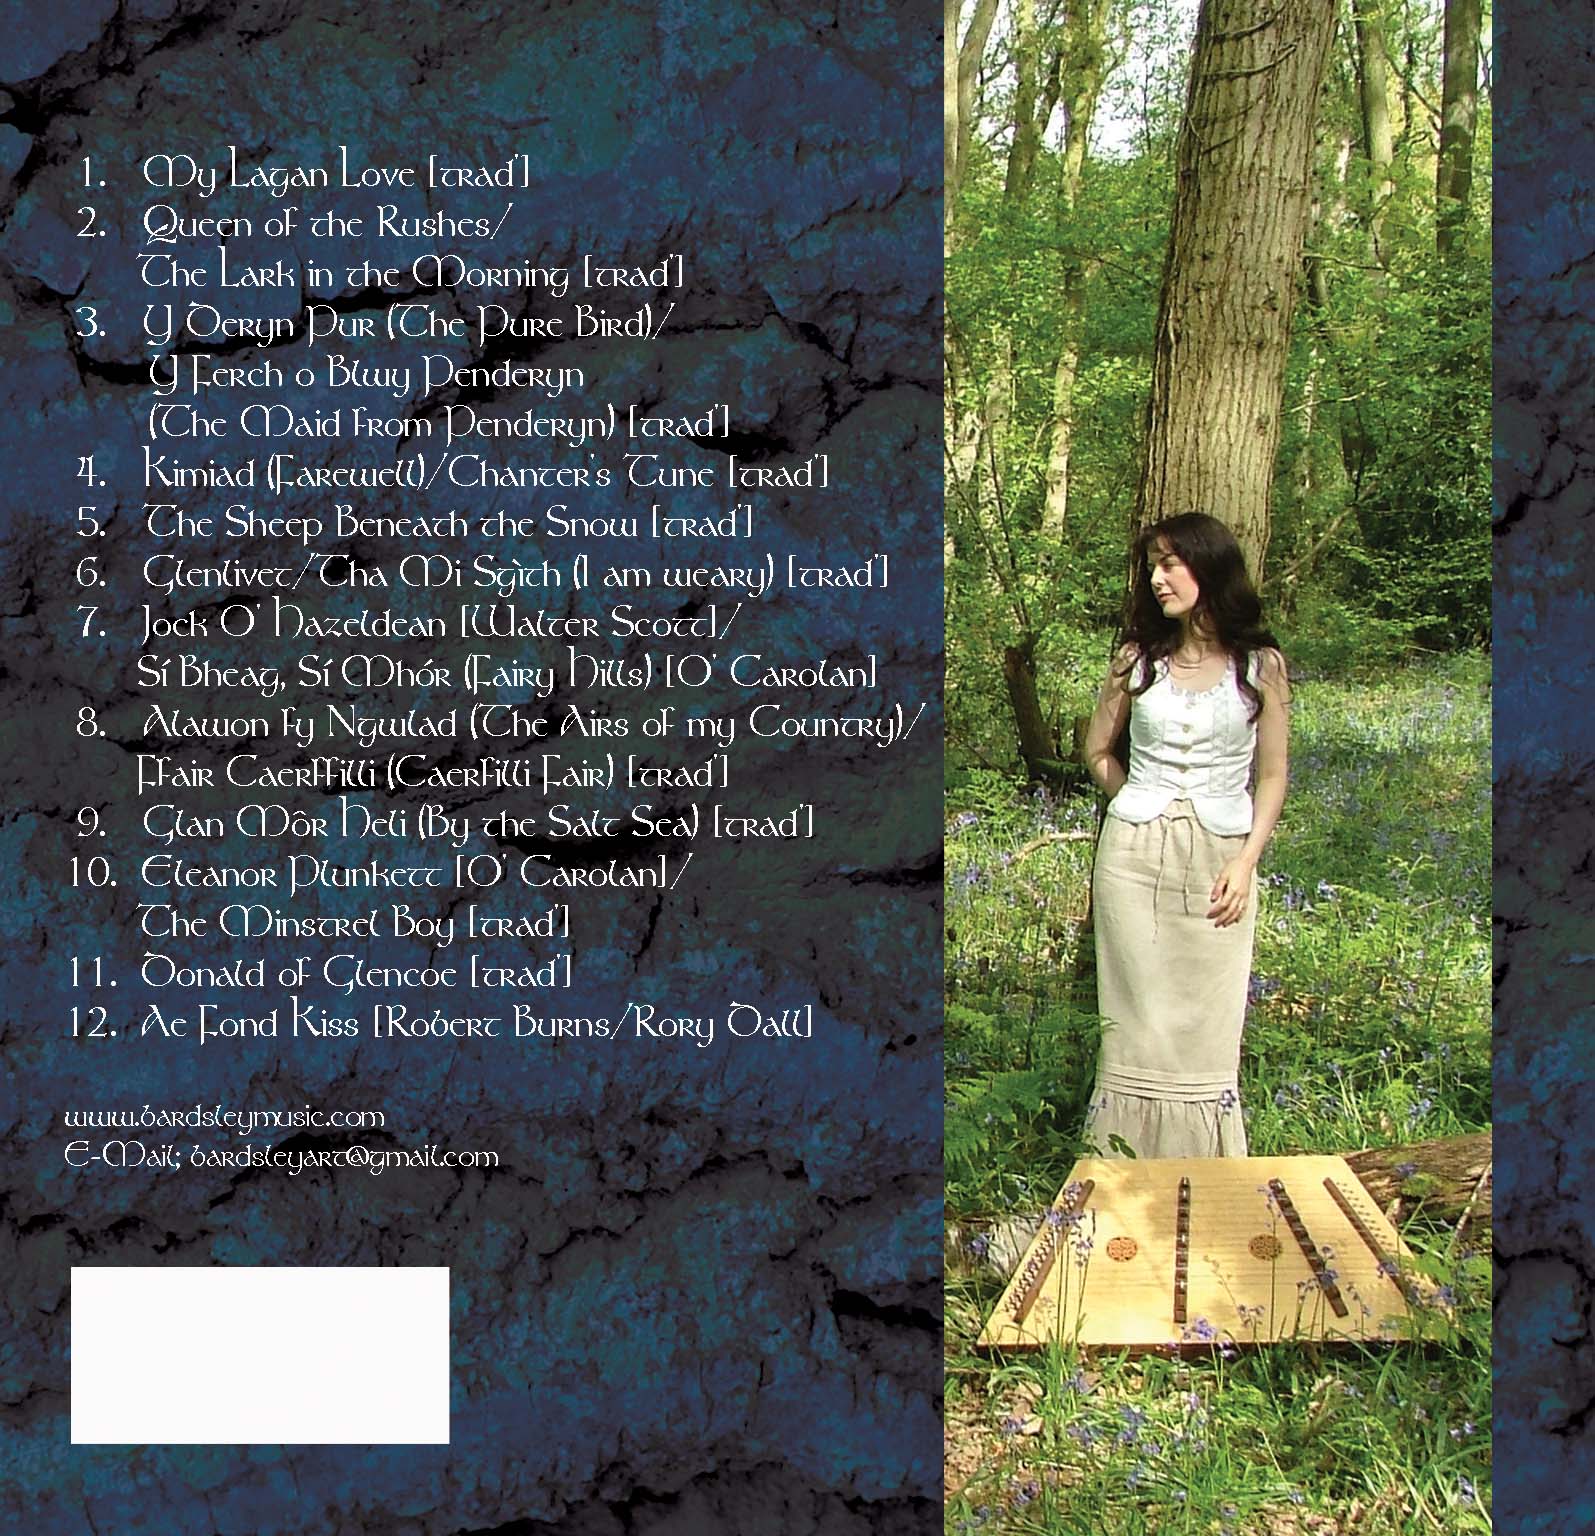 Queen of the rushes cover showing track listing